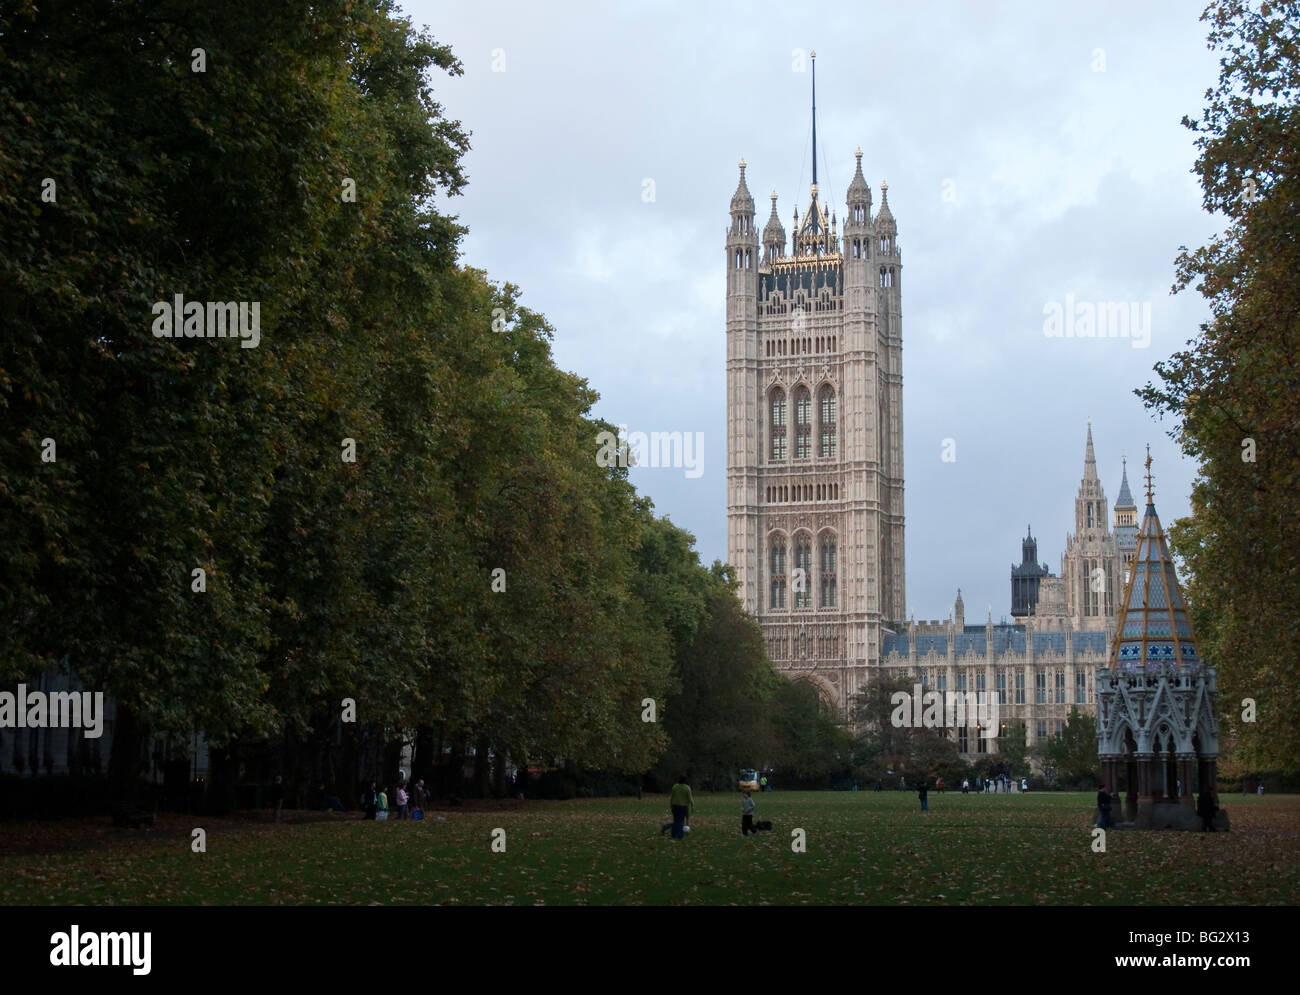 A view of the Victoria Tower in the Palace of Westminster, London, United Kingdom. Stock Photo